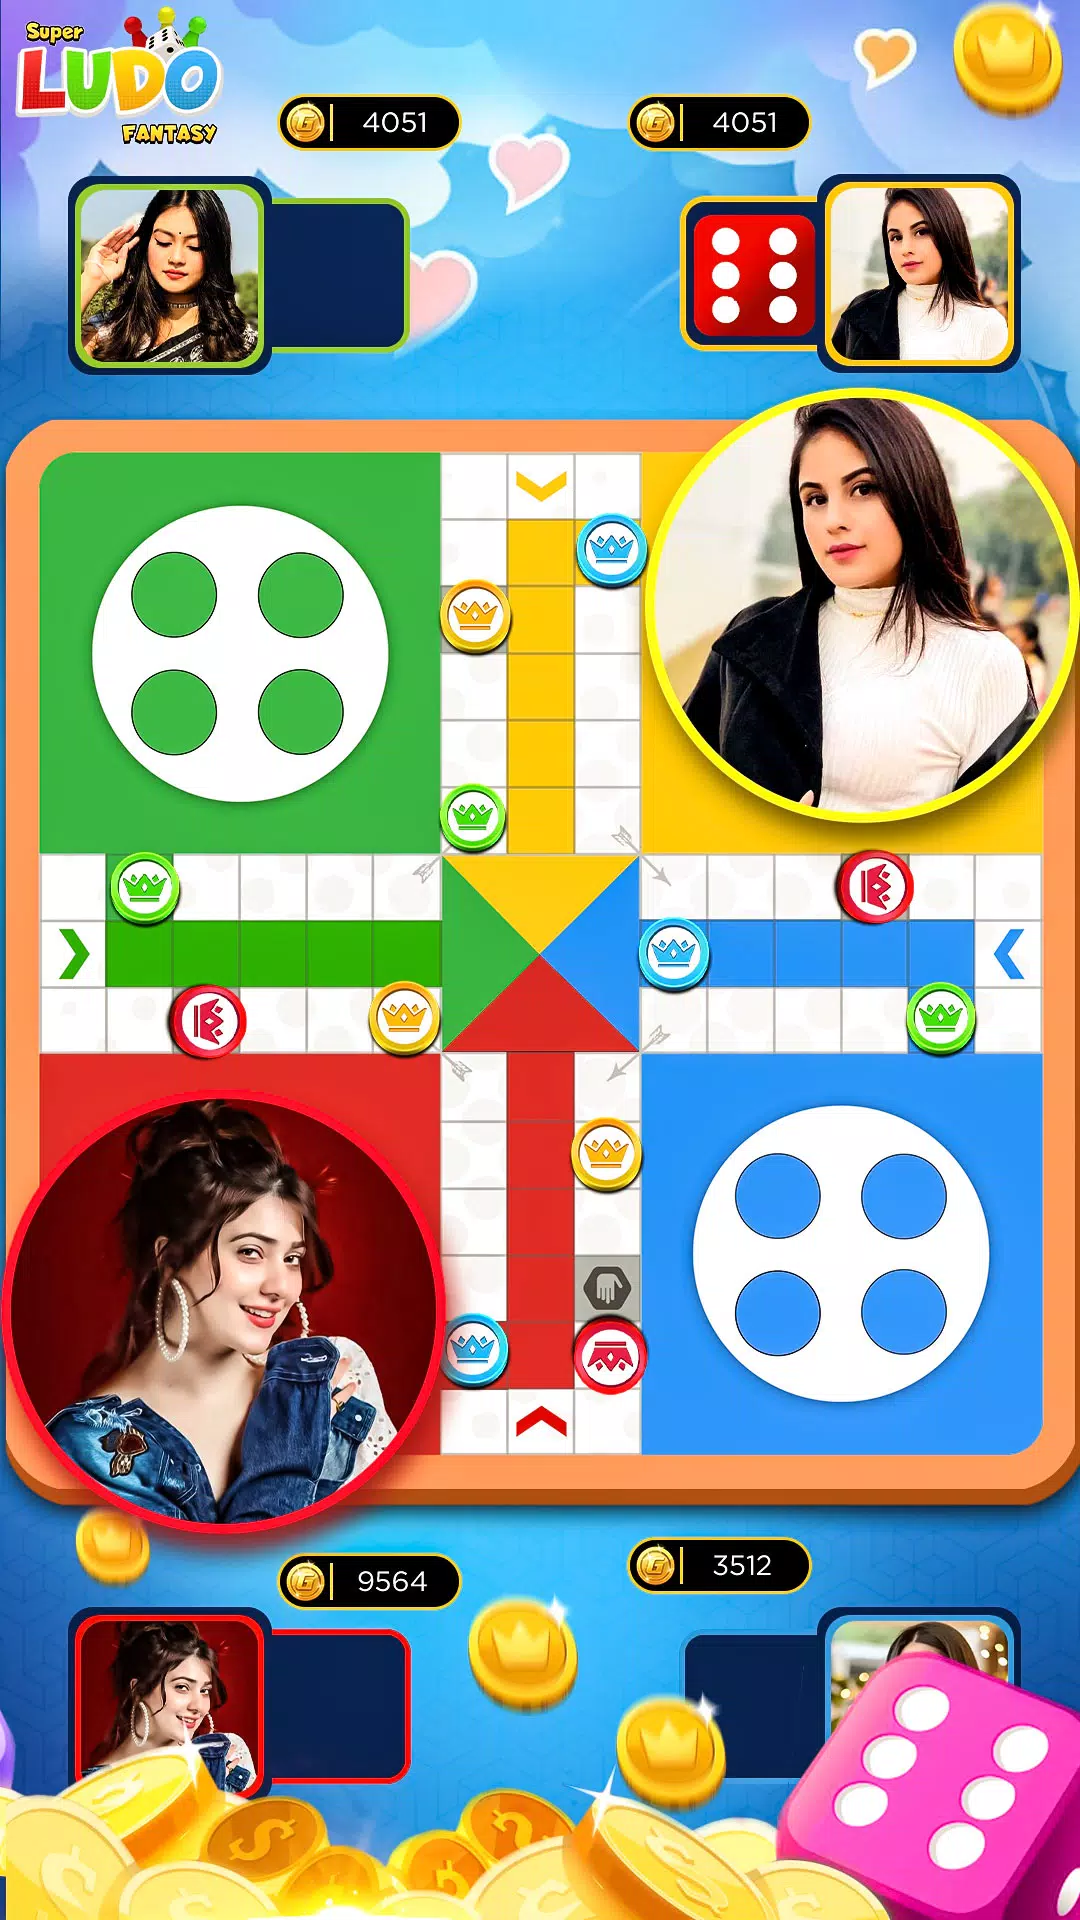 A Complete Ludo Multiplayer online game